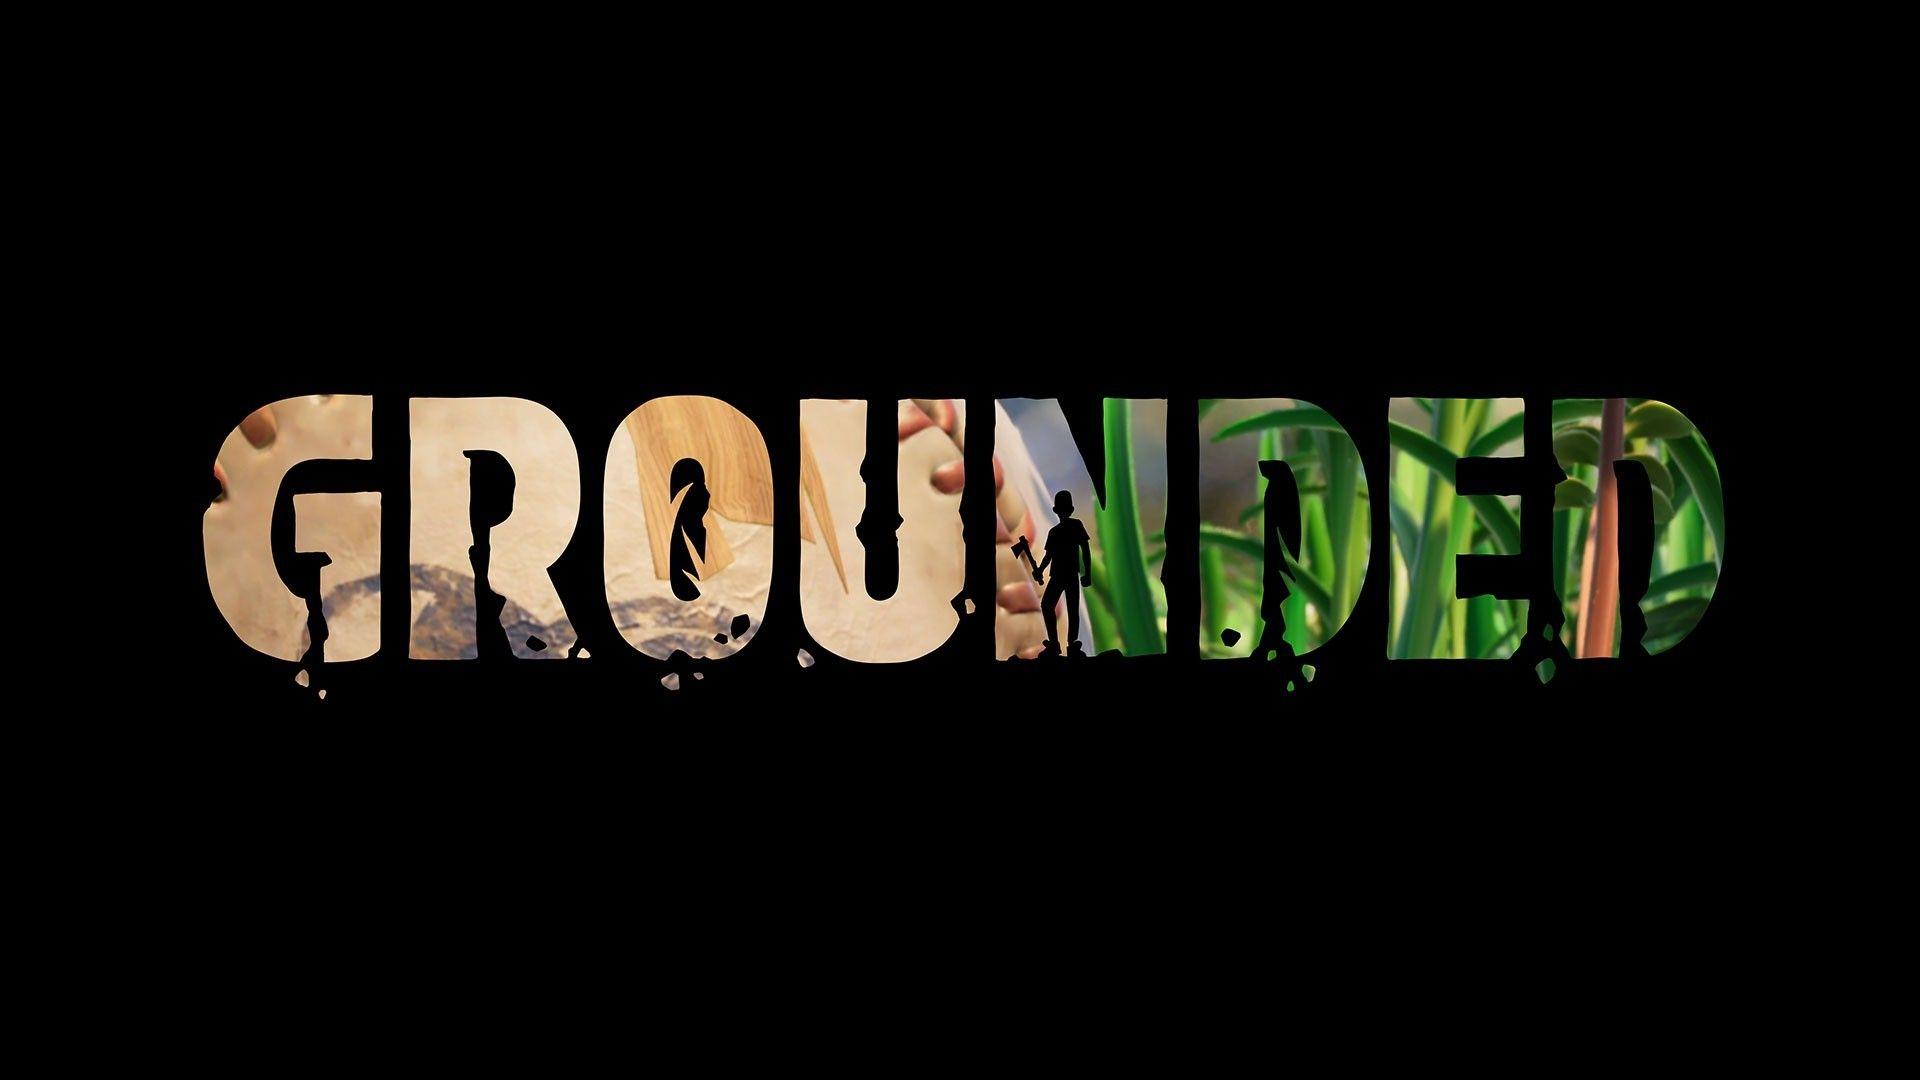 grounded download